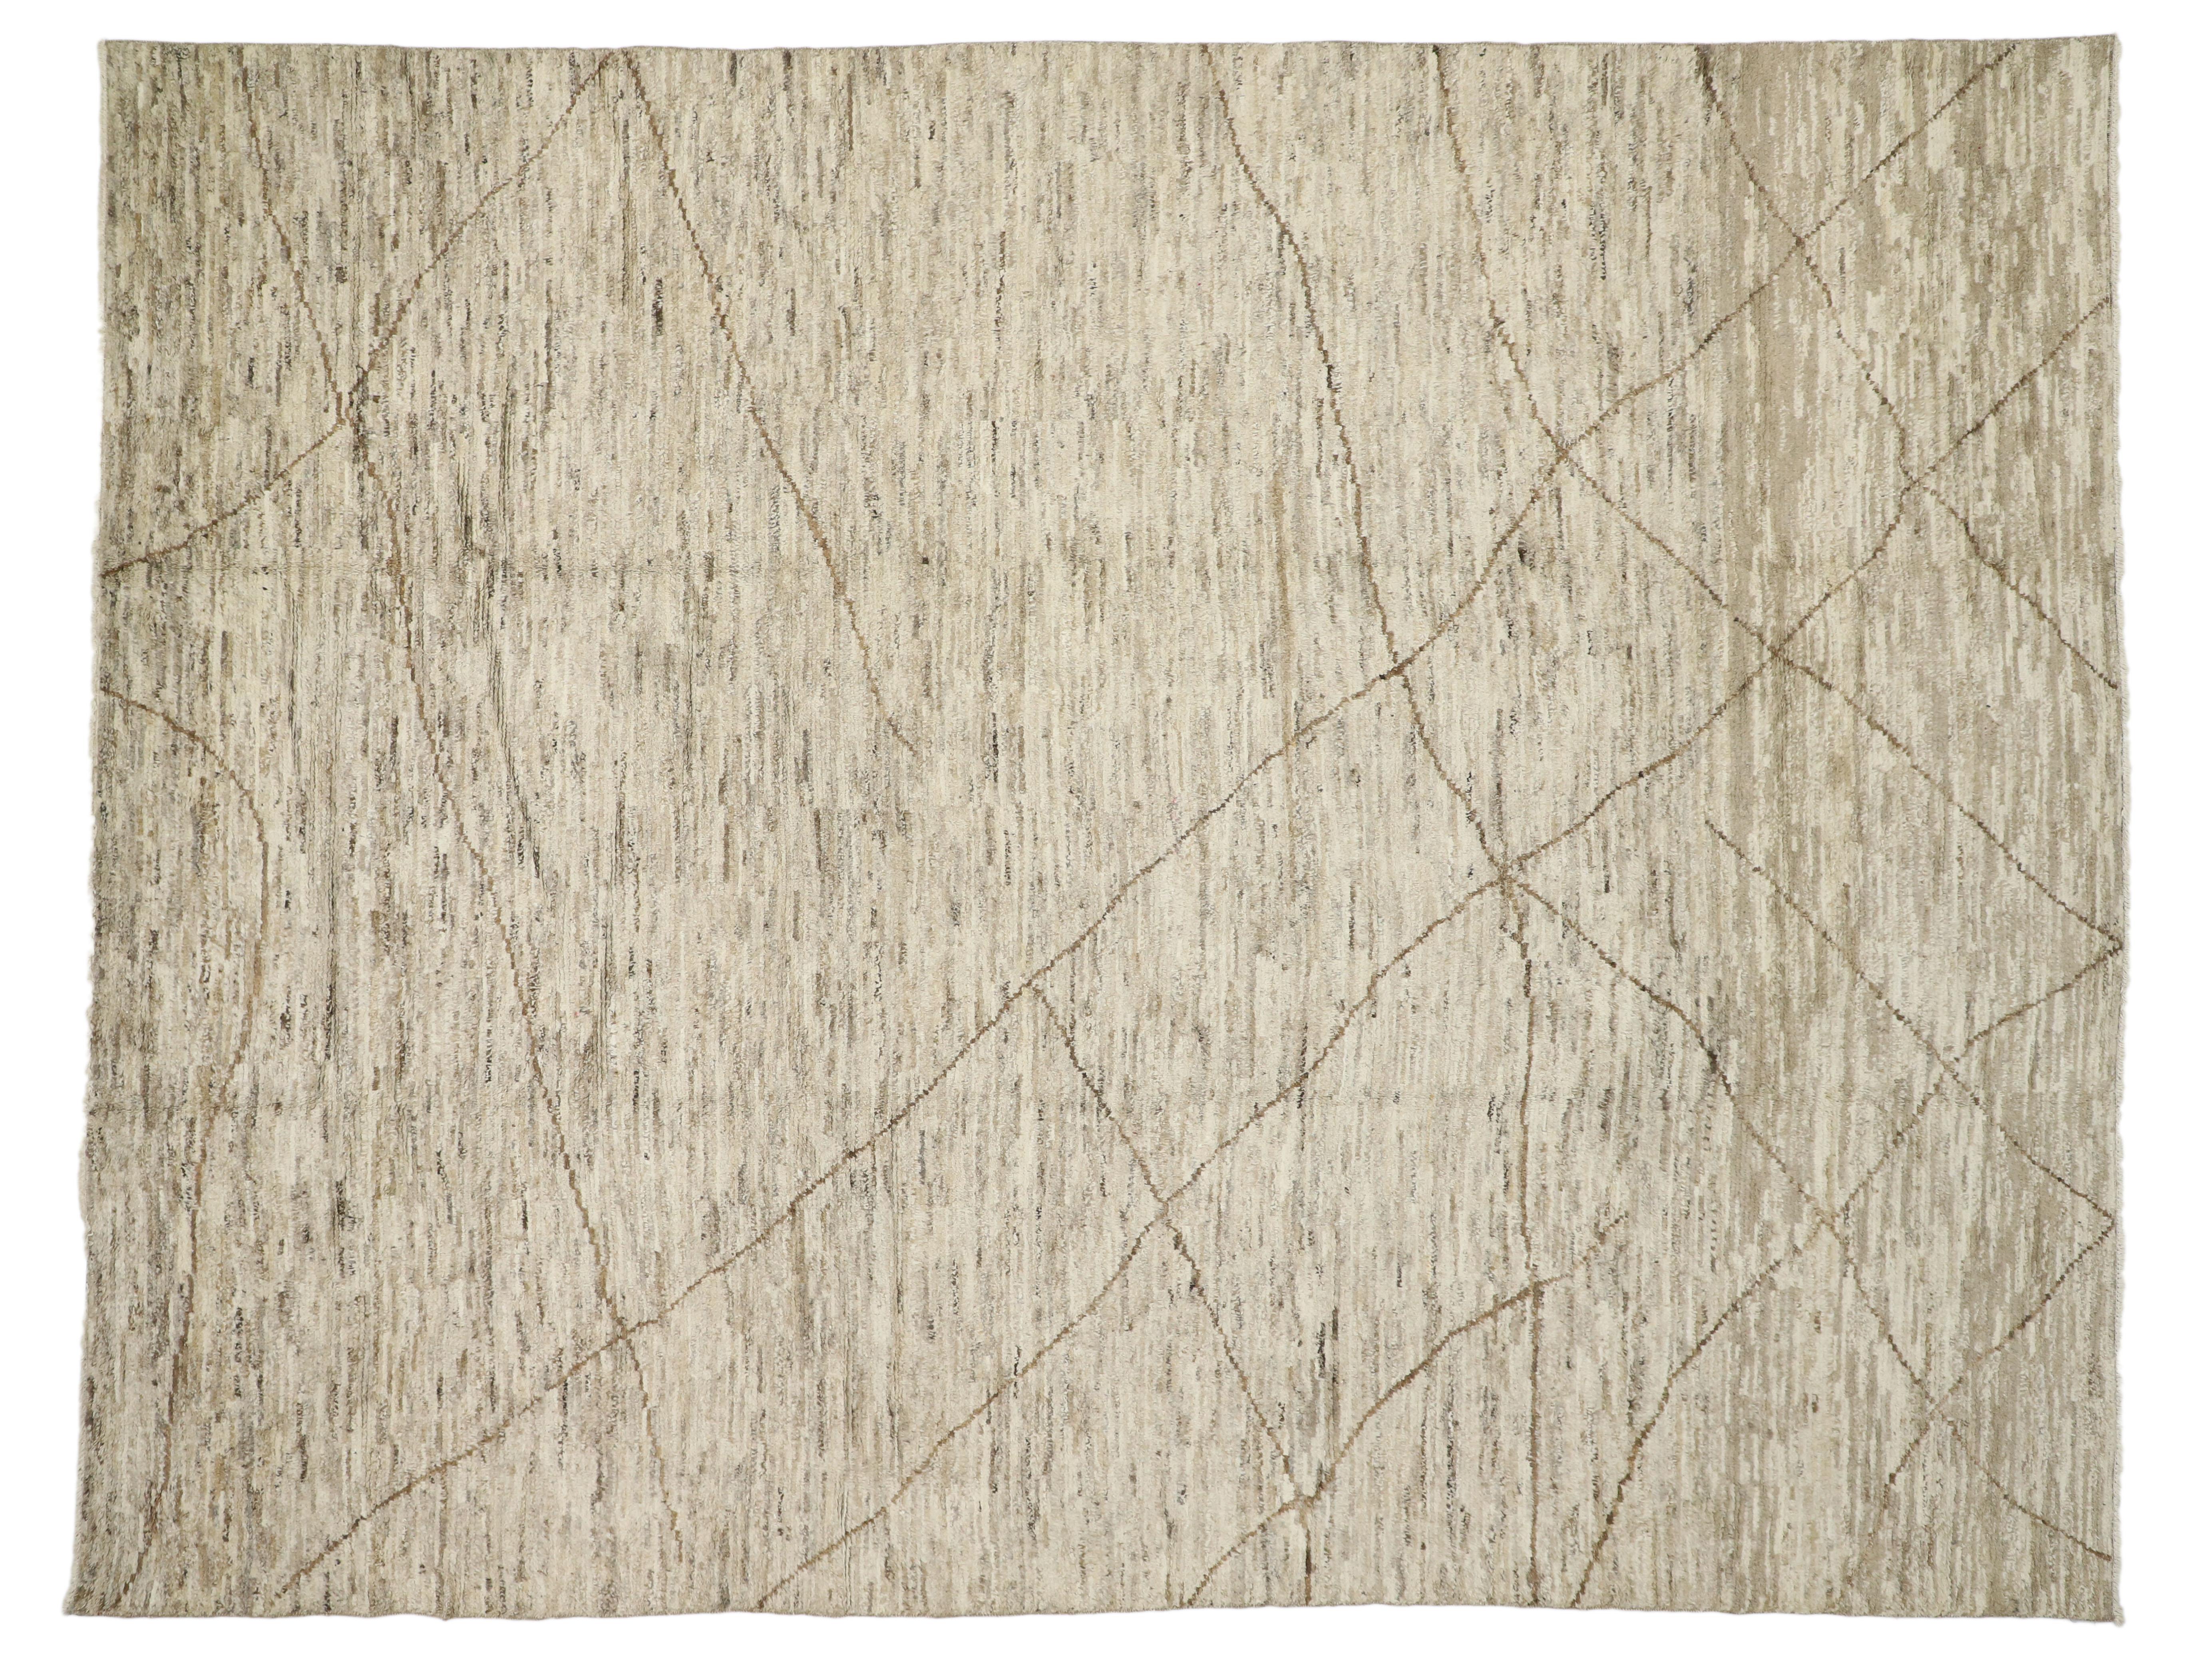 80206 New Contemporary Moroccan Area Rug with Modern Design, Warm Neutral Earth Tones. A fine example of minimalism, this contemporary brown Moroccan area rug embodies the modern concept of less is more. The simplistic style and asymmetrical lines